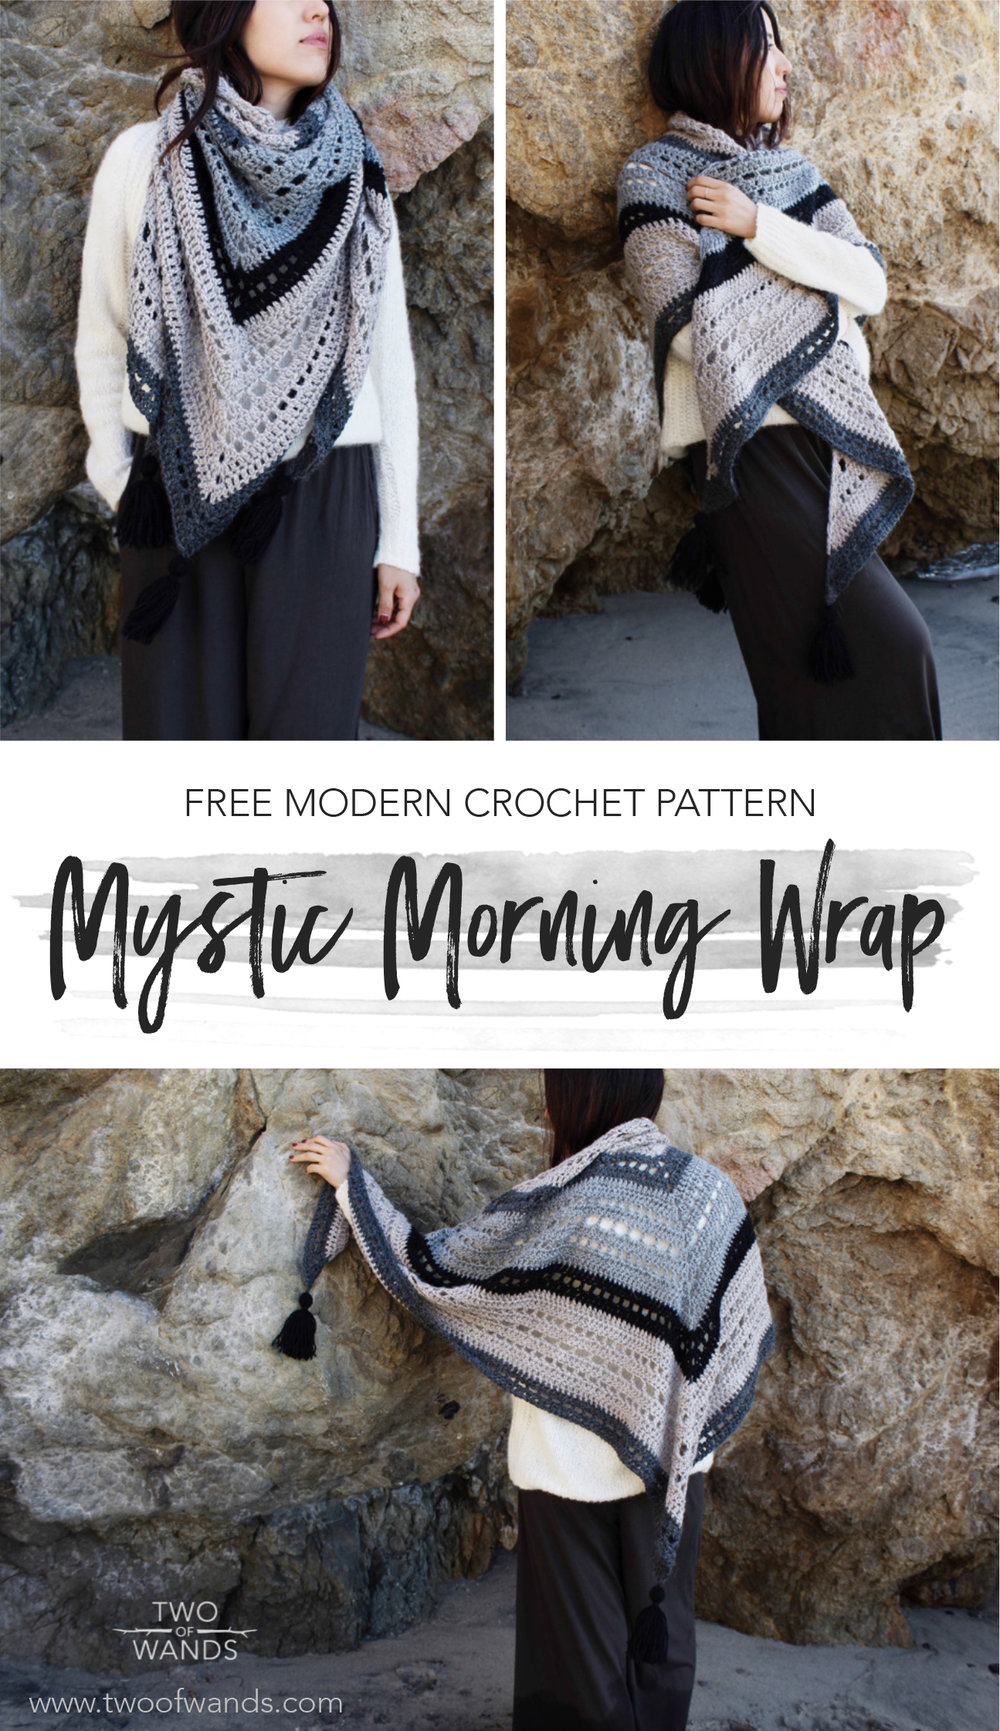 Mystic Morning Wrap Pattern by Two of Wands